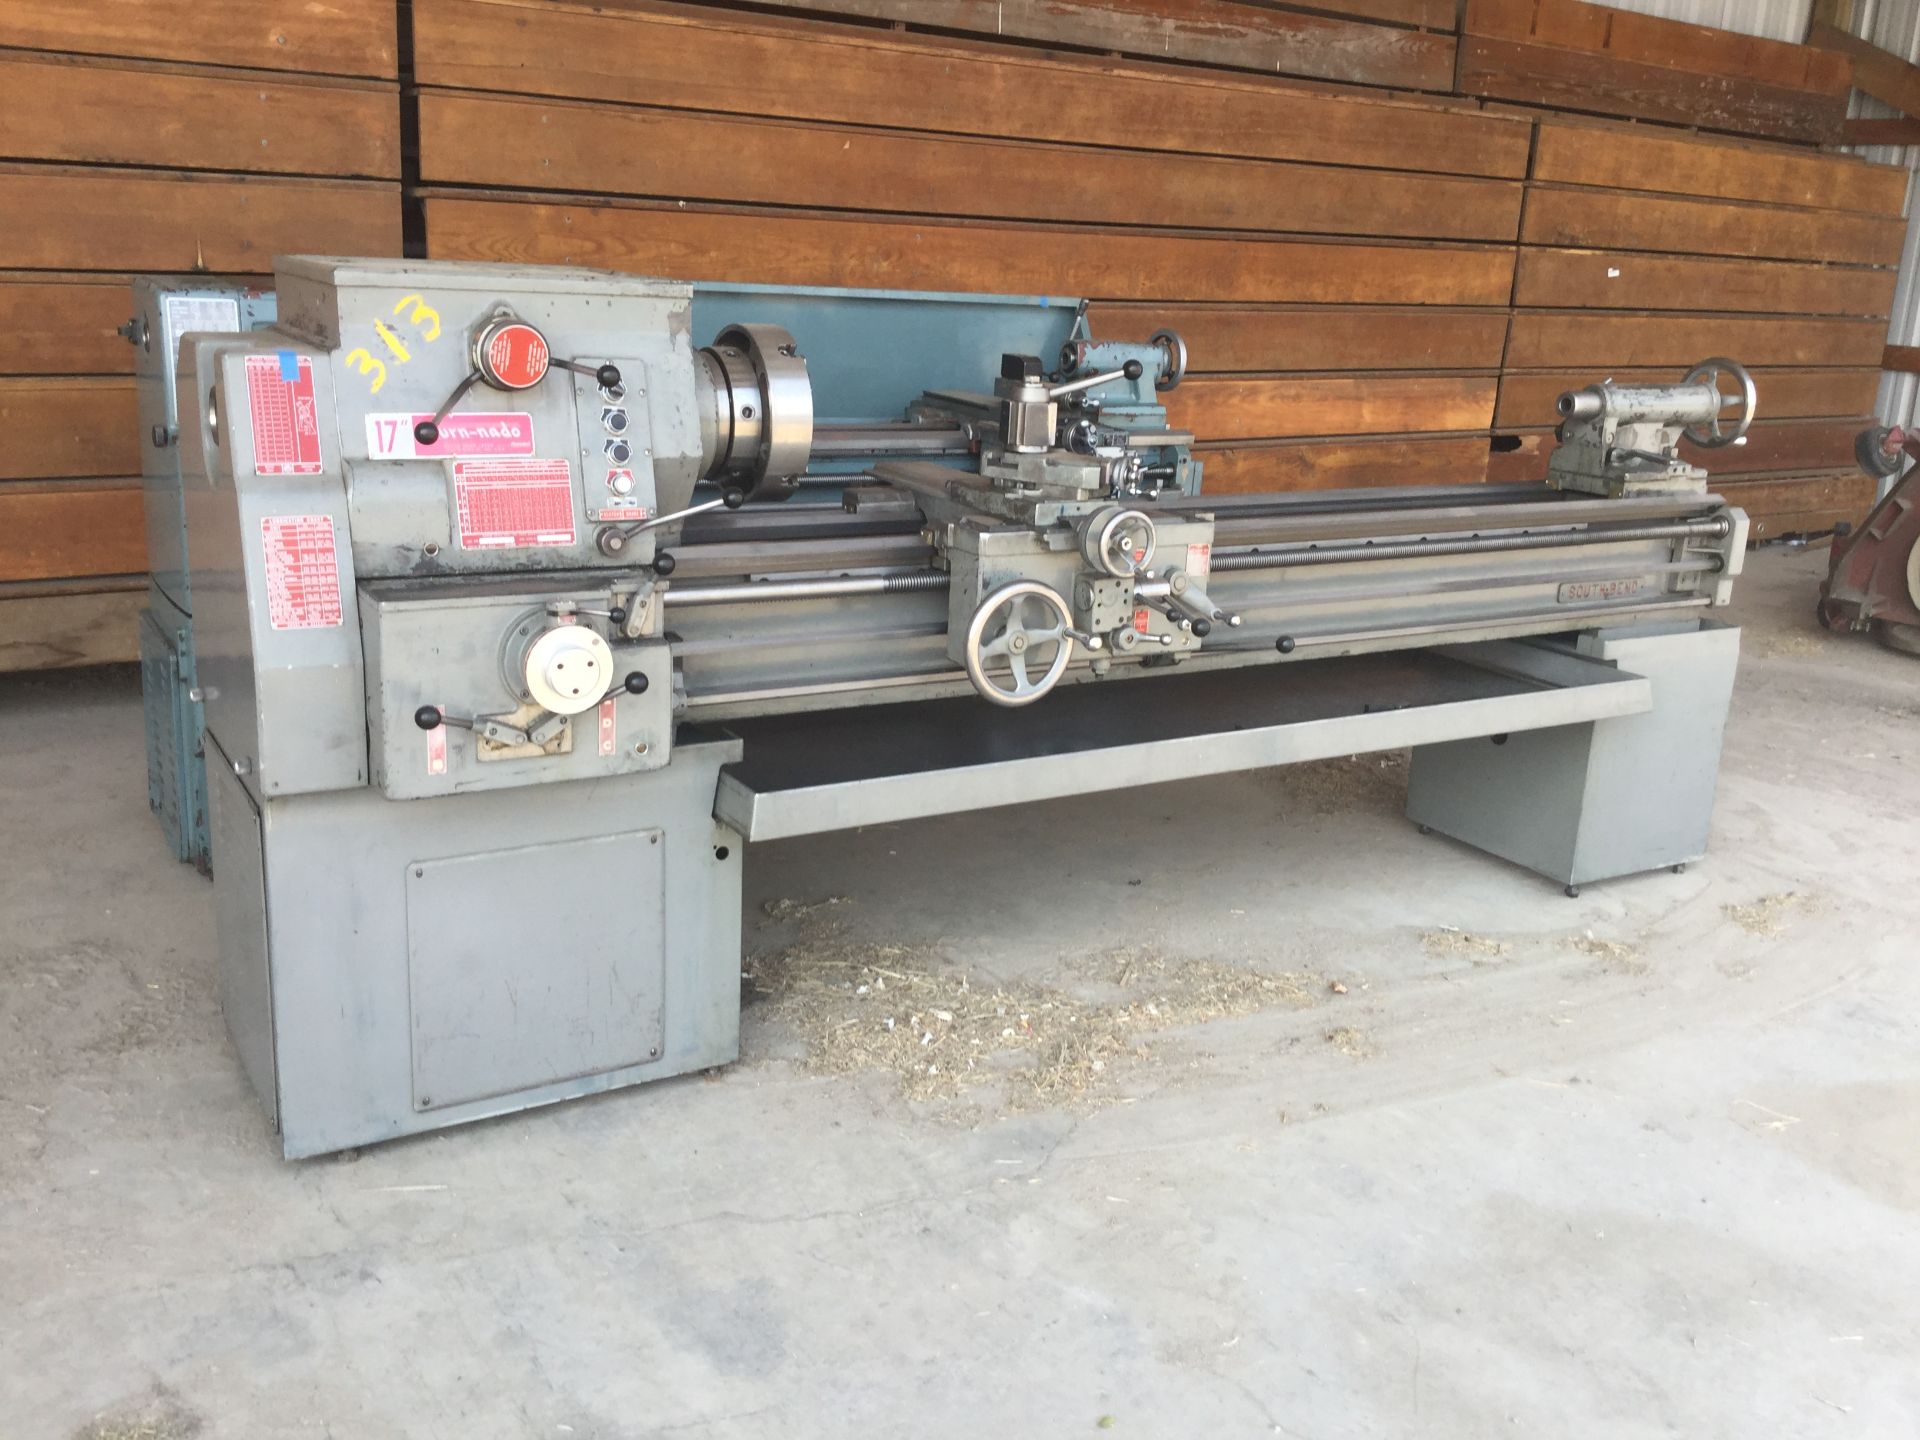 Year: unknown Make: SouthBend Model: Turn-Nado CL170G Type: Metal Lathe Vin#: unknown Mileage/Hours: